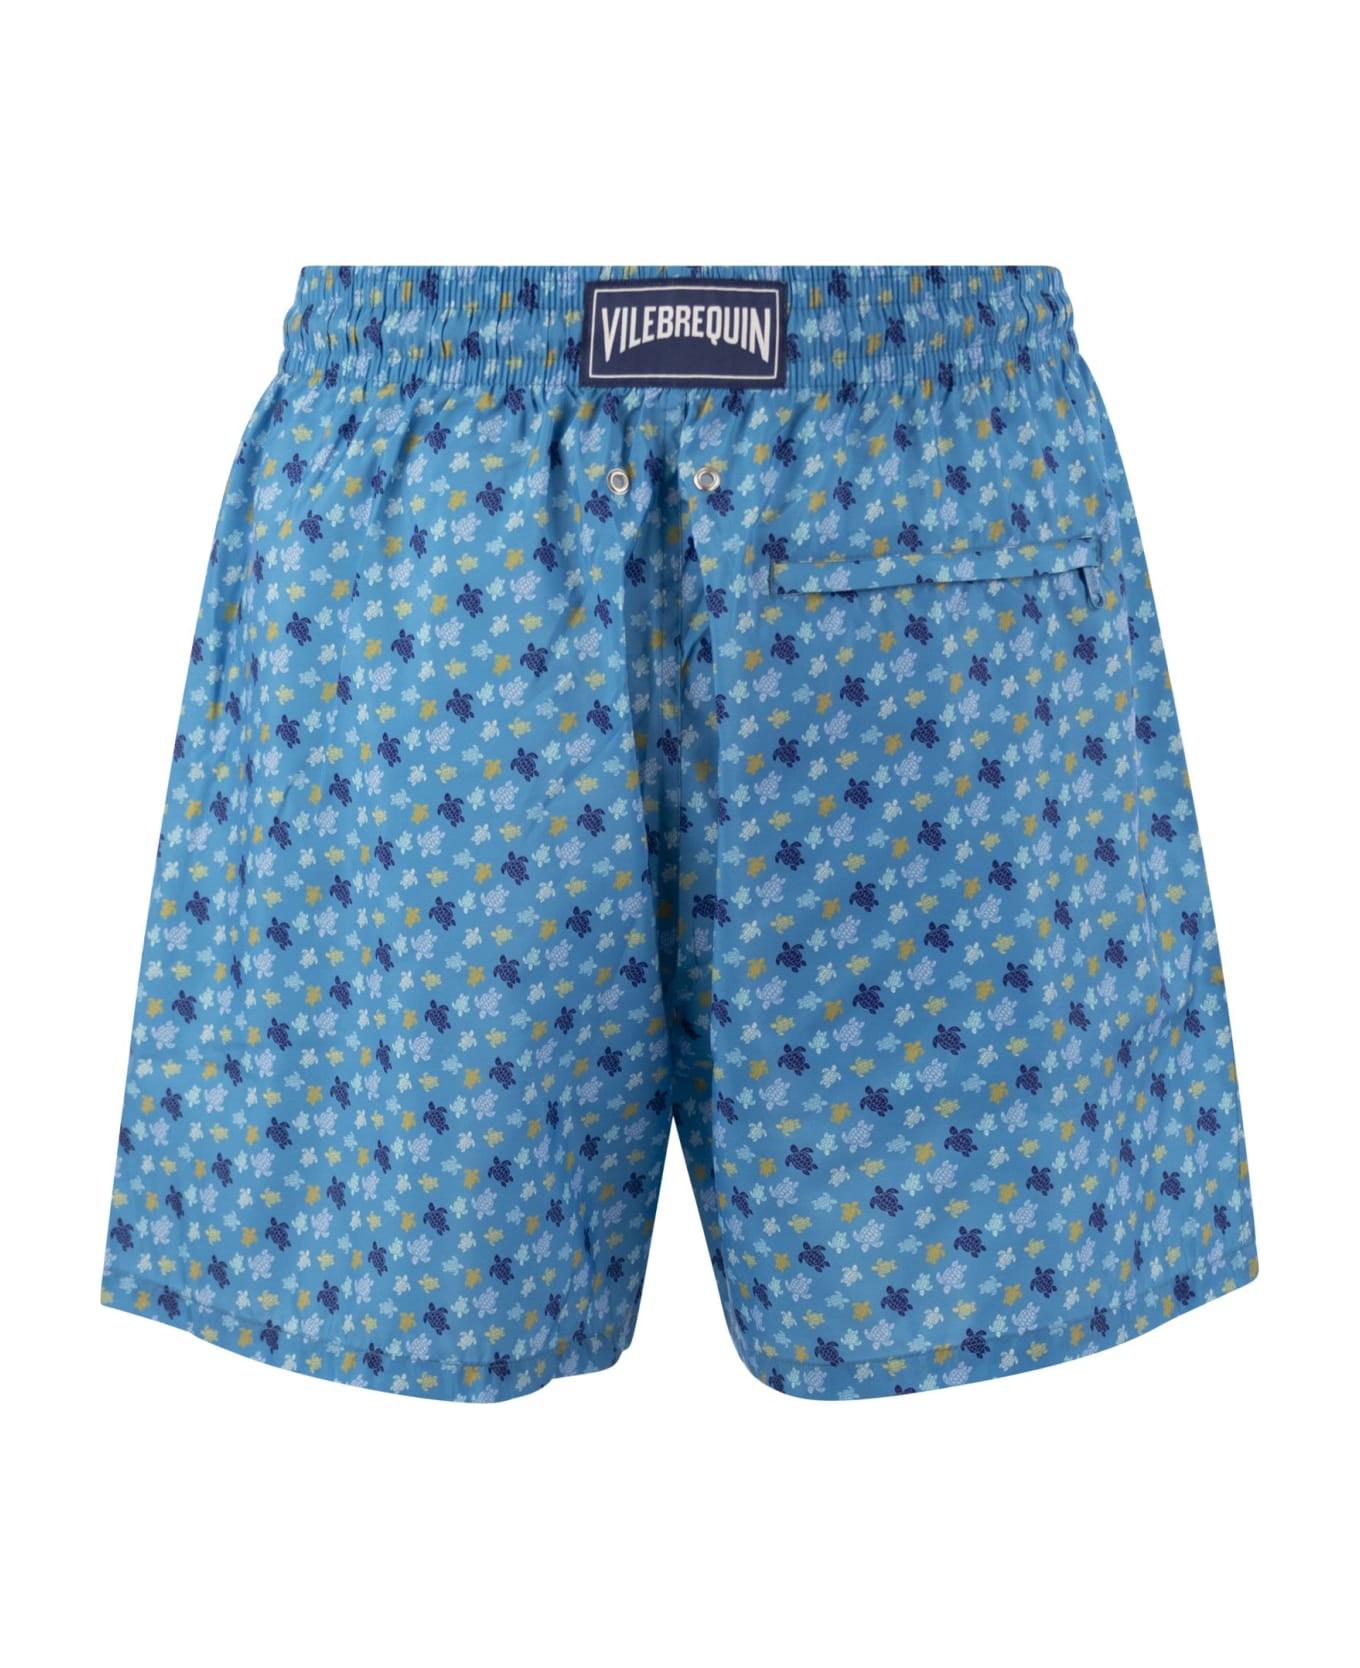 Vilebrequin Ultralight And Foldable Patterned Beach Shorts - Light Blue